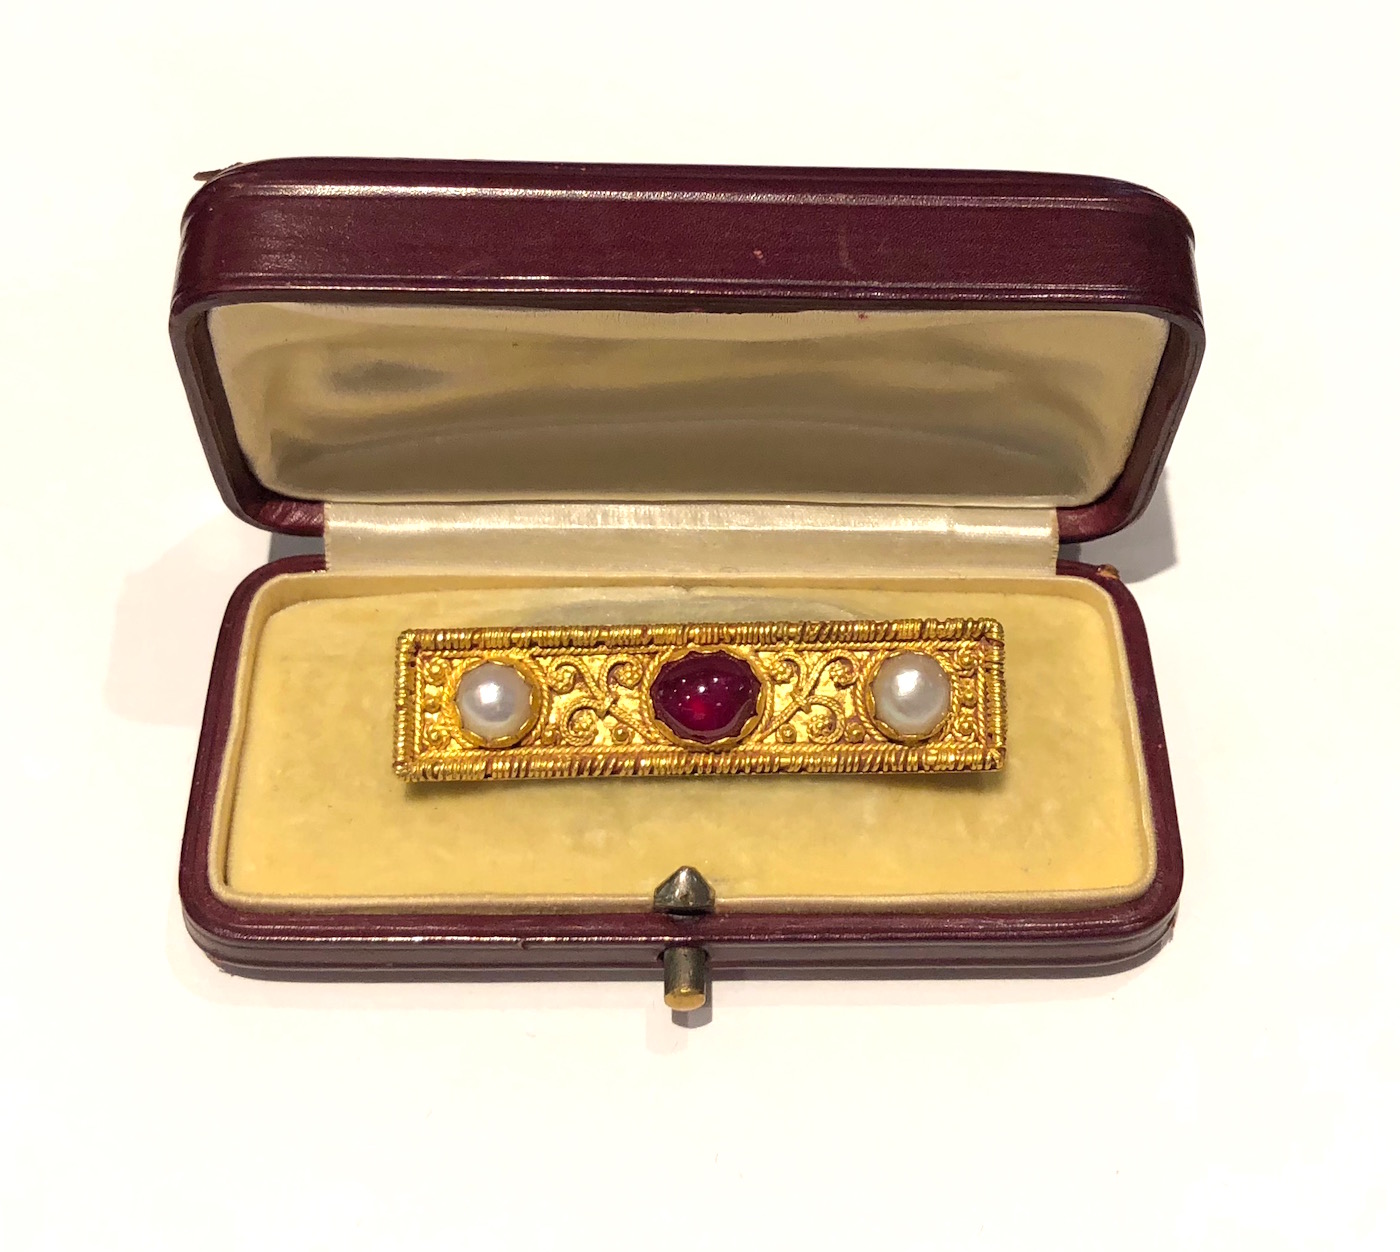 Jules & Louis Wiese Etruscan Revival brooch set with a gem quality cabochon ruby (approx. 4.32 carats by calculation) and two natural pearls (7mm each) all in an elaborate 18k gold mount with intricate twisted scrolls and a gold wire wrapped border signed: Wiese (in Gothic-style signature mark), French diamond maker’s poincon, French Eagle’s head mark for 18k gold, original burgundy leather presentation box with fancy embossed gilt initials on the cover and a vanilla silk velvet and satin interior, c.1875